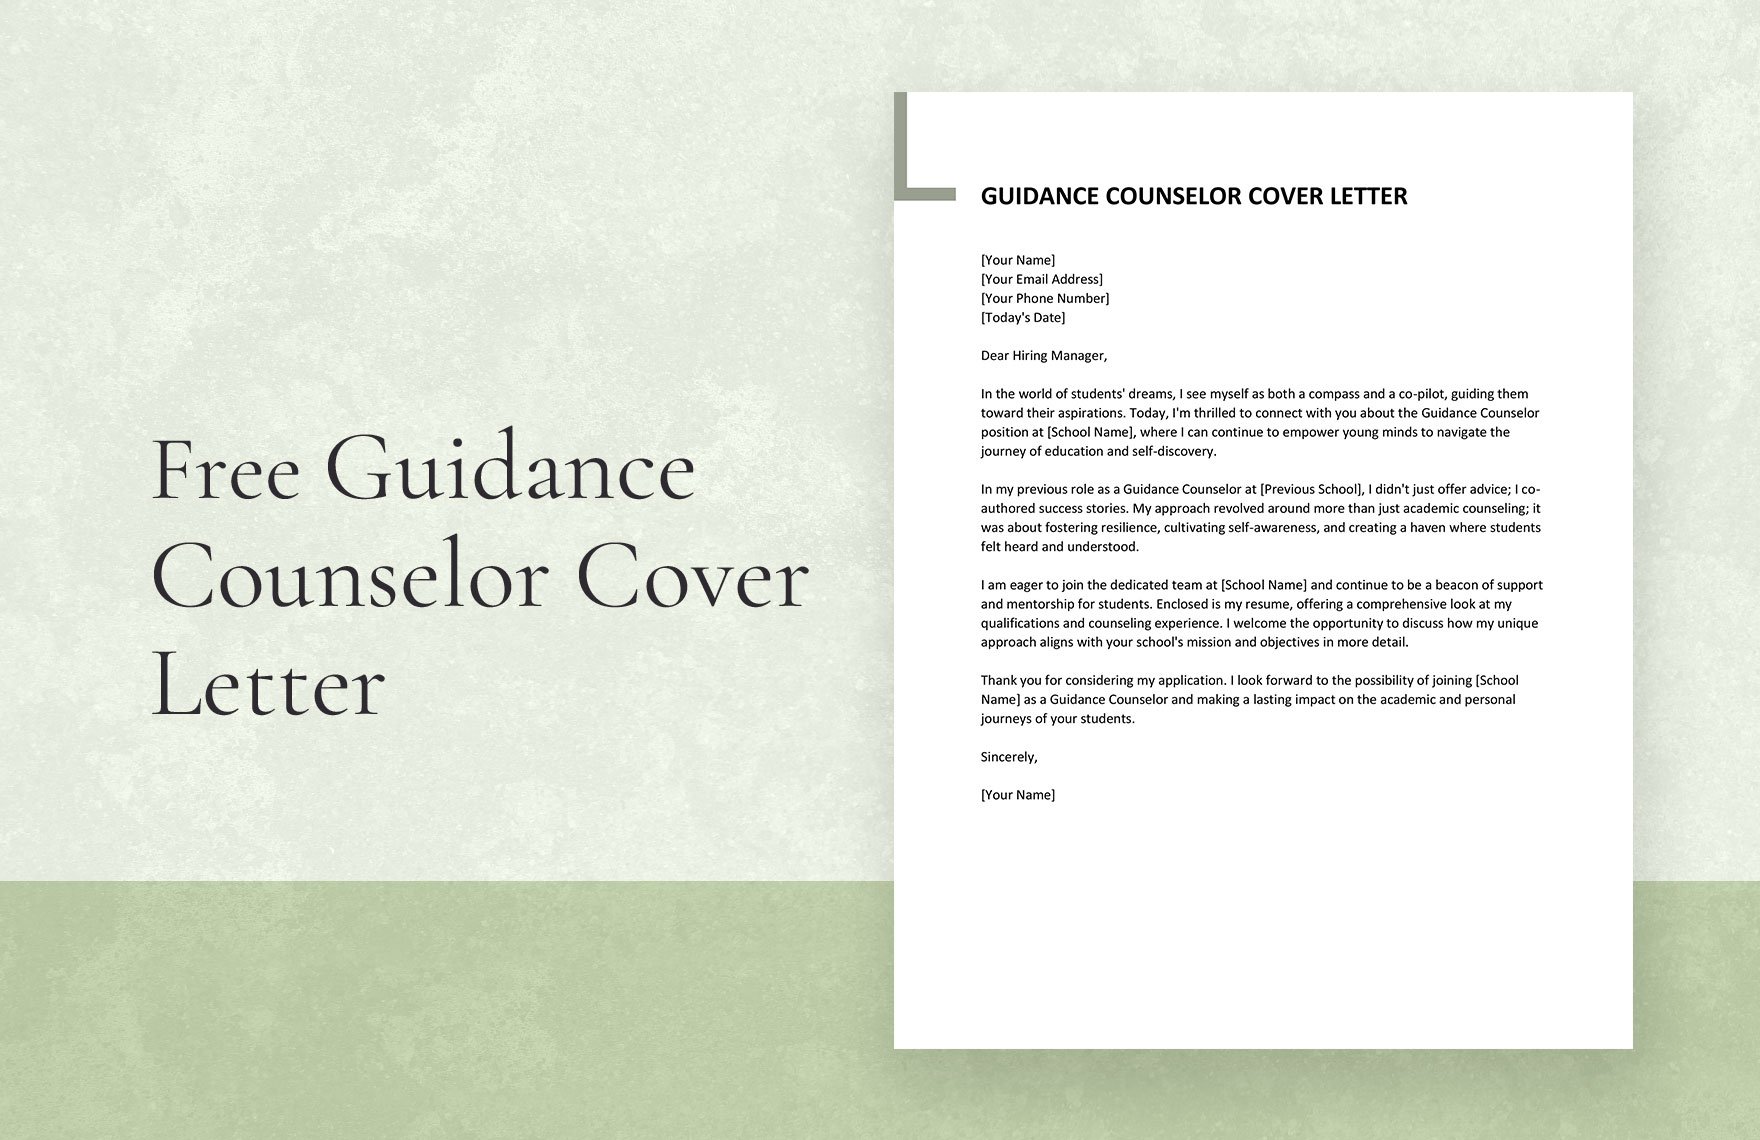 Guidance Counselor Cover Letter